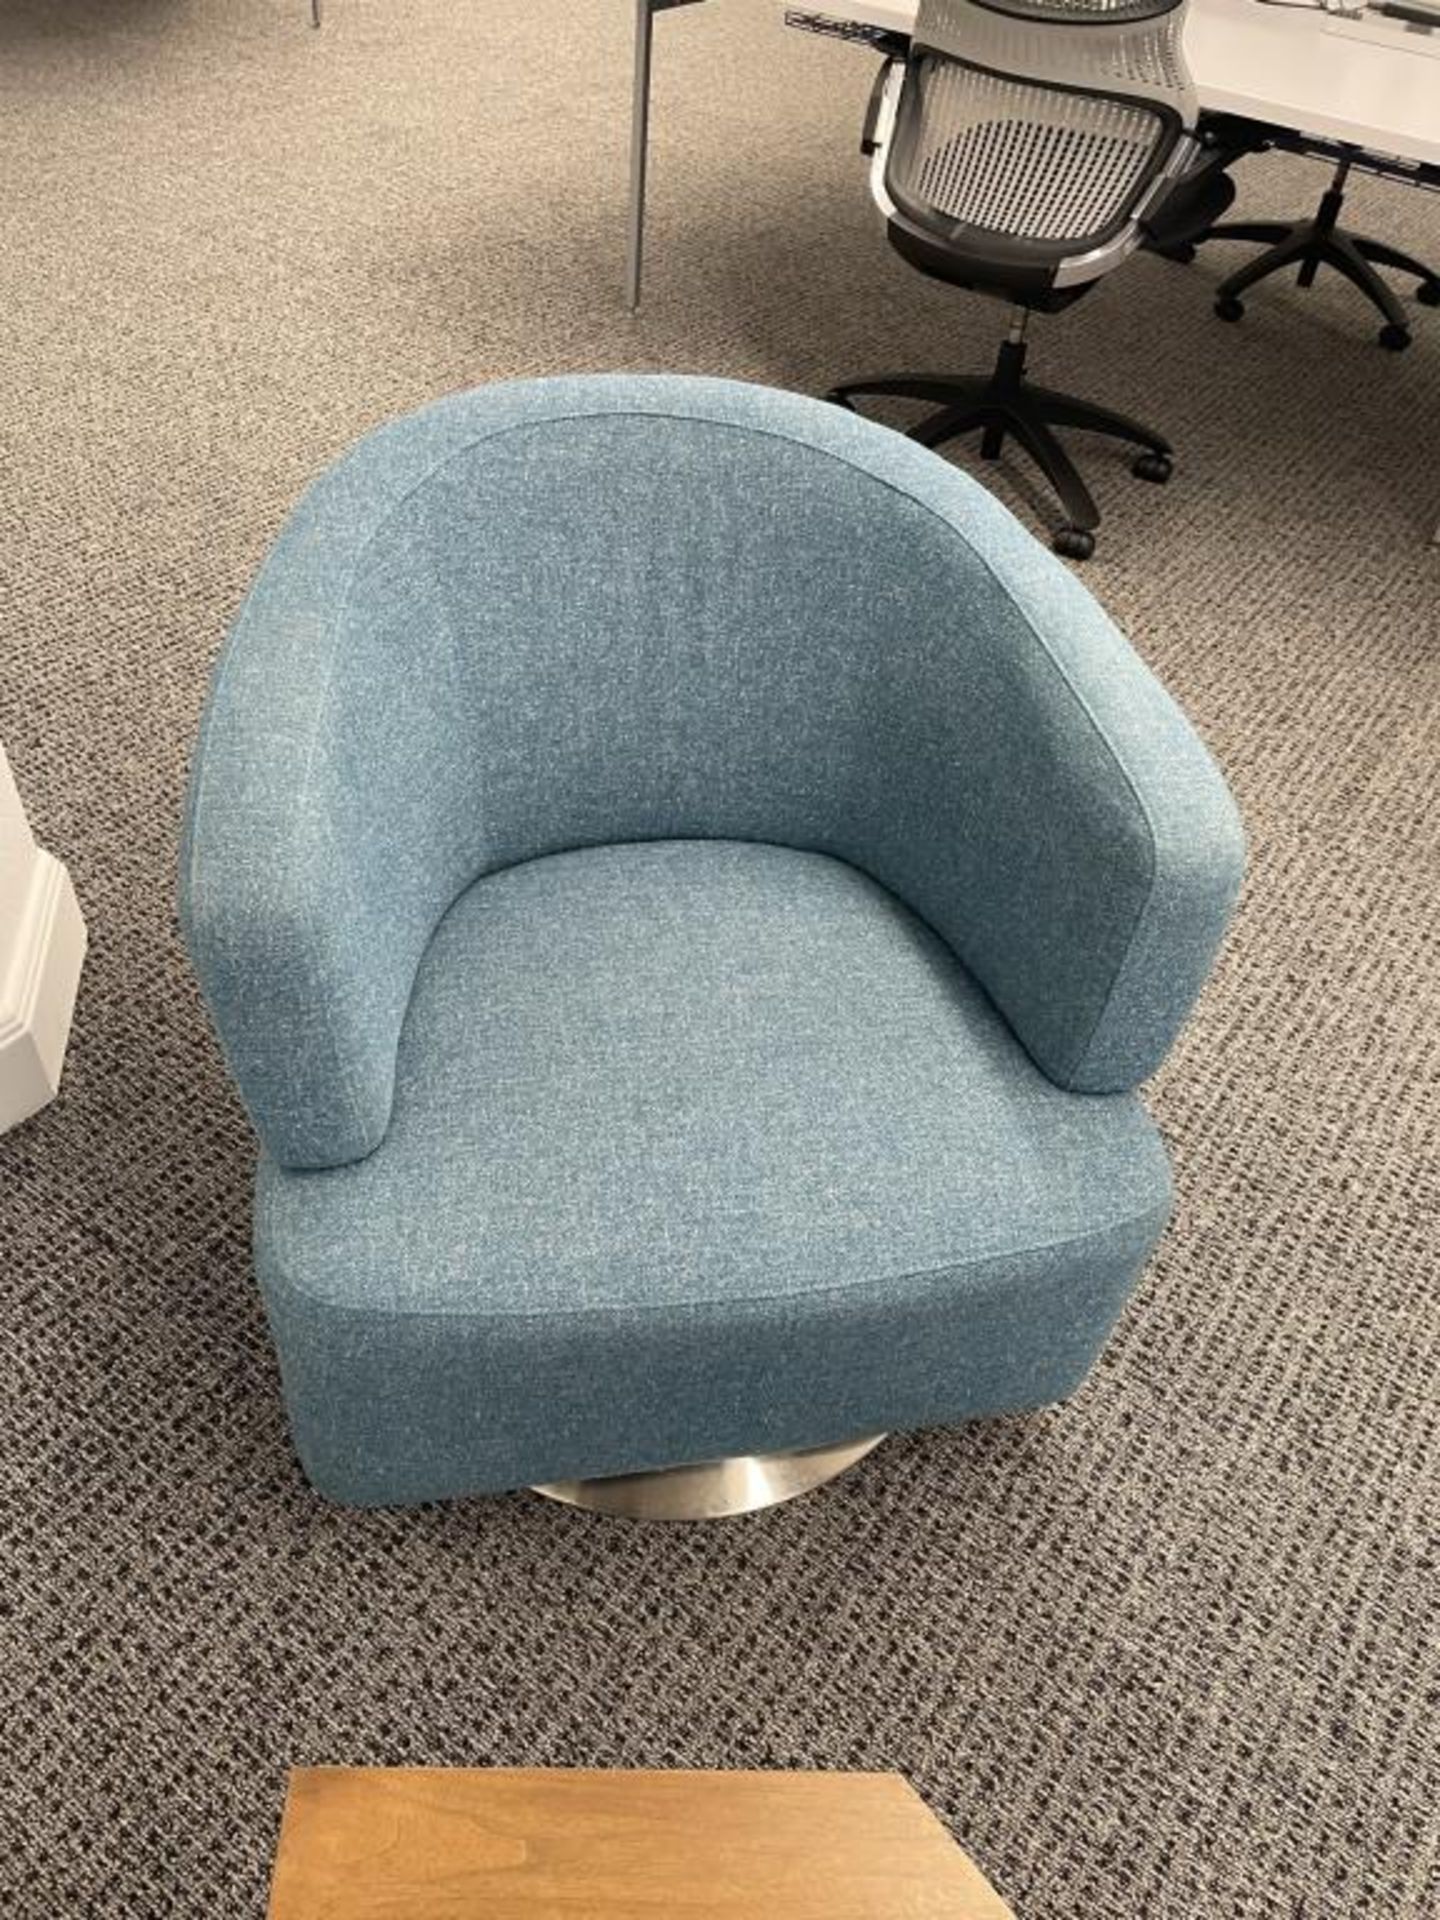 (3qty) Jason Furniture Teal Swivel Chairs - Image 5 of 9